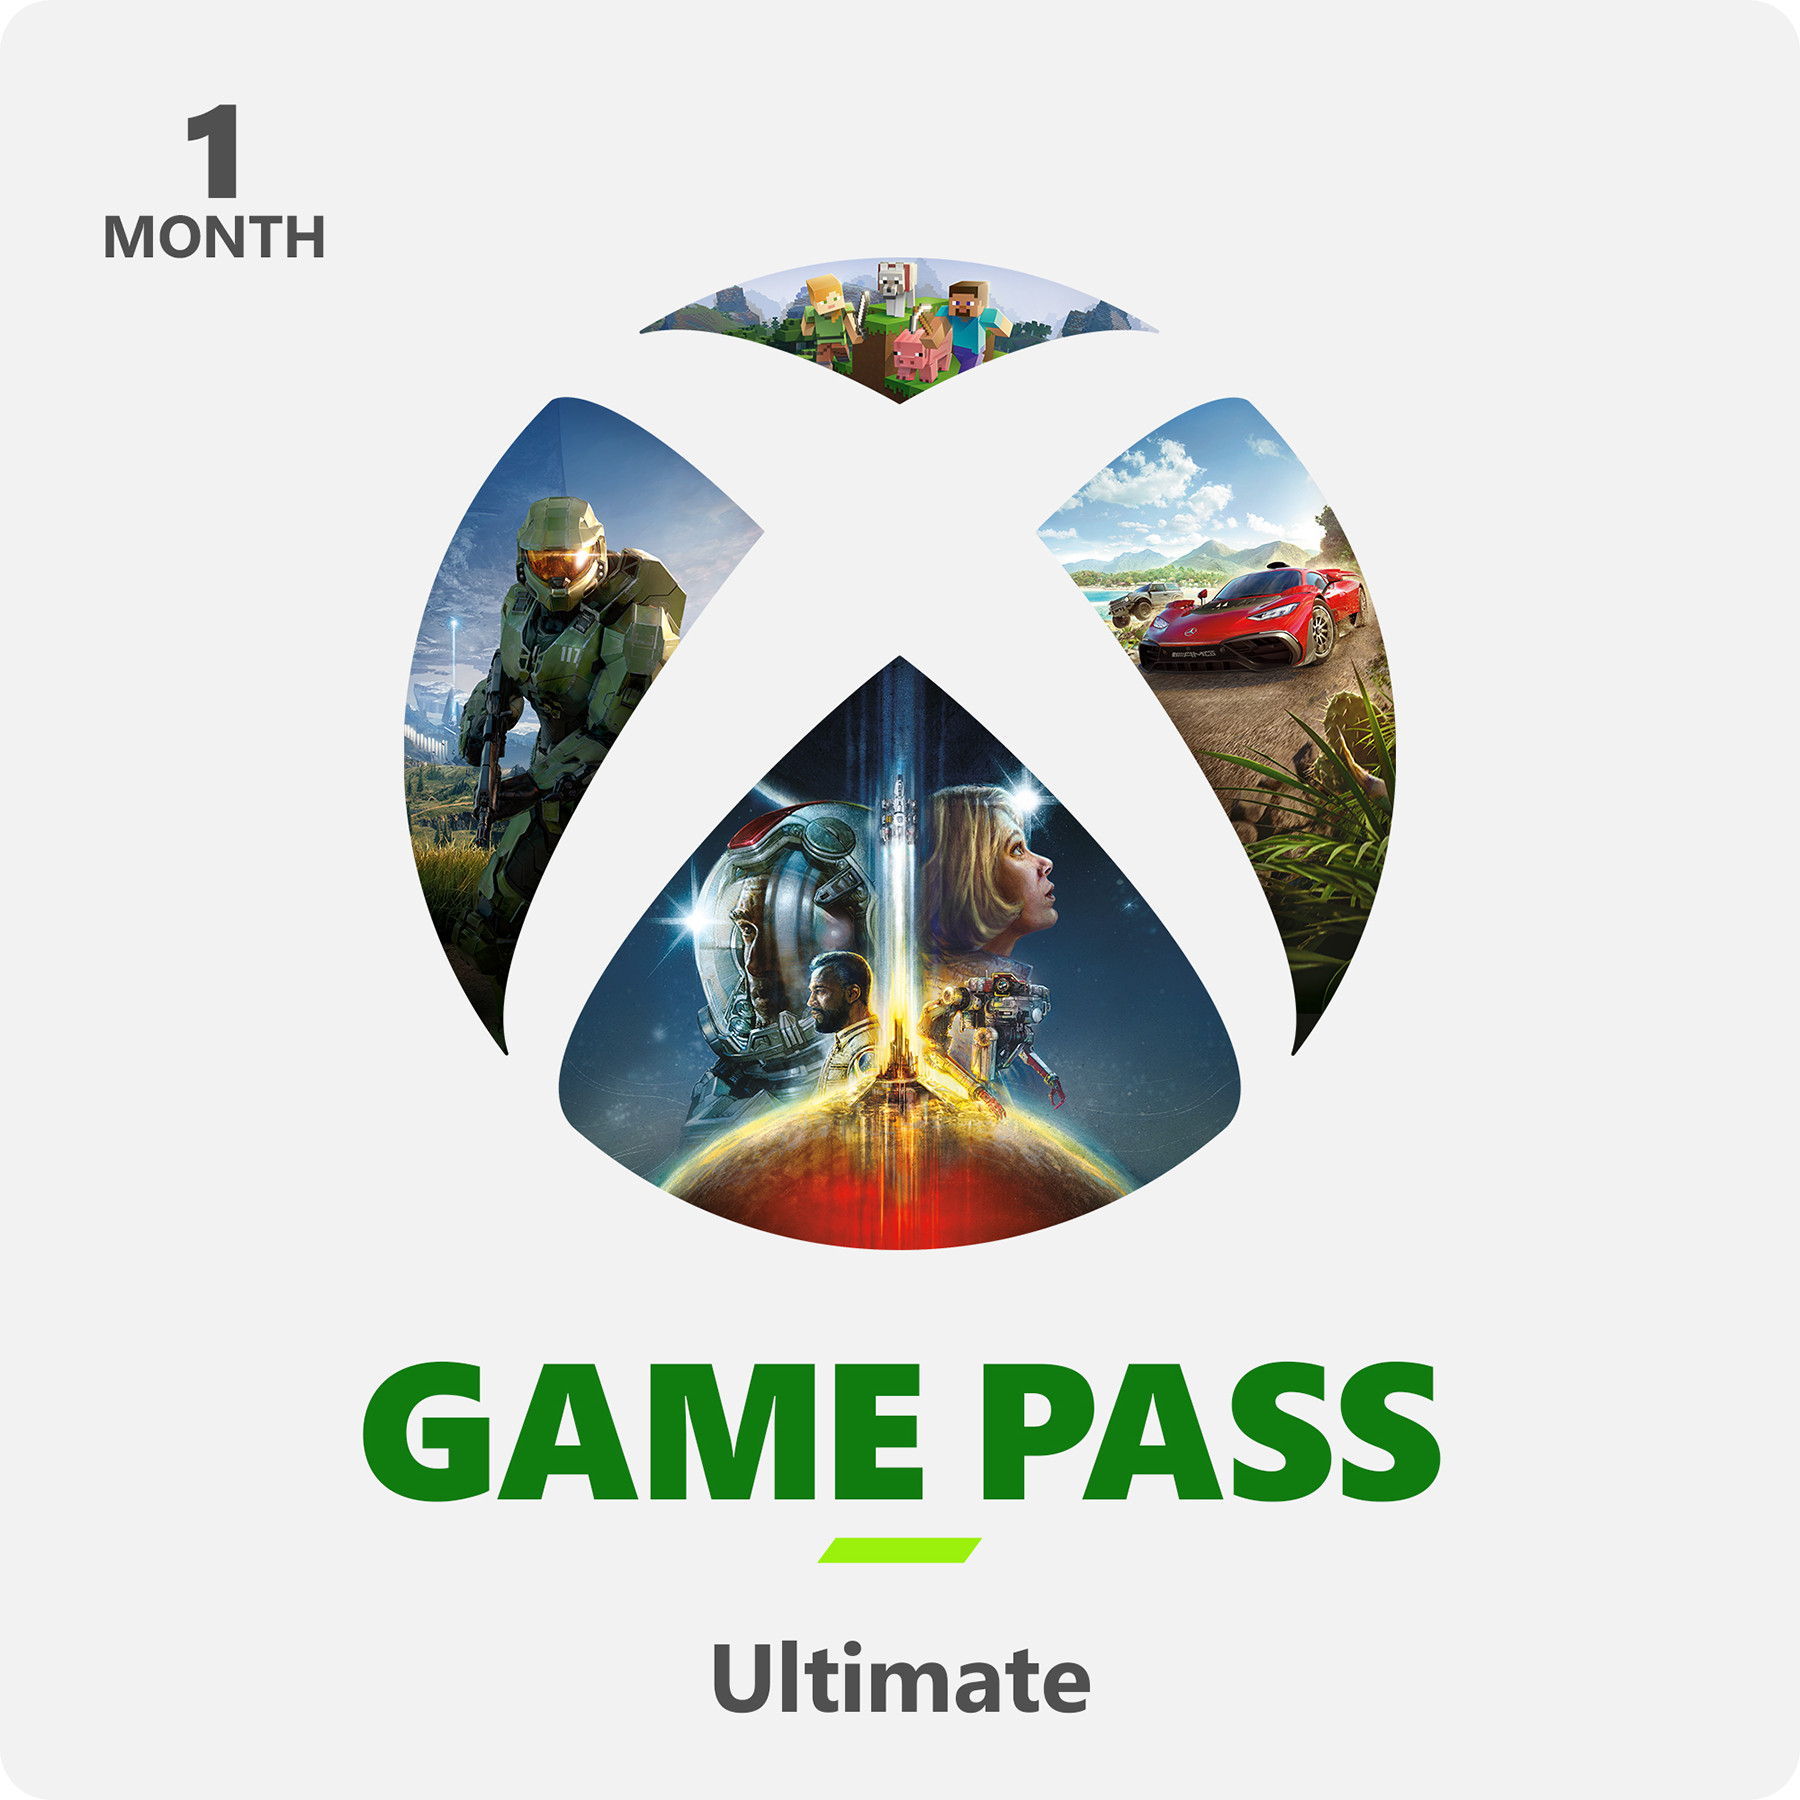 symbool Polair Concentratie Nedgame gameshop: Xbox Live Game Pass Ultimate Online - 1 Maand (PC Gaming)  kopen